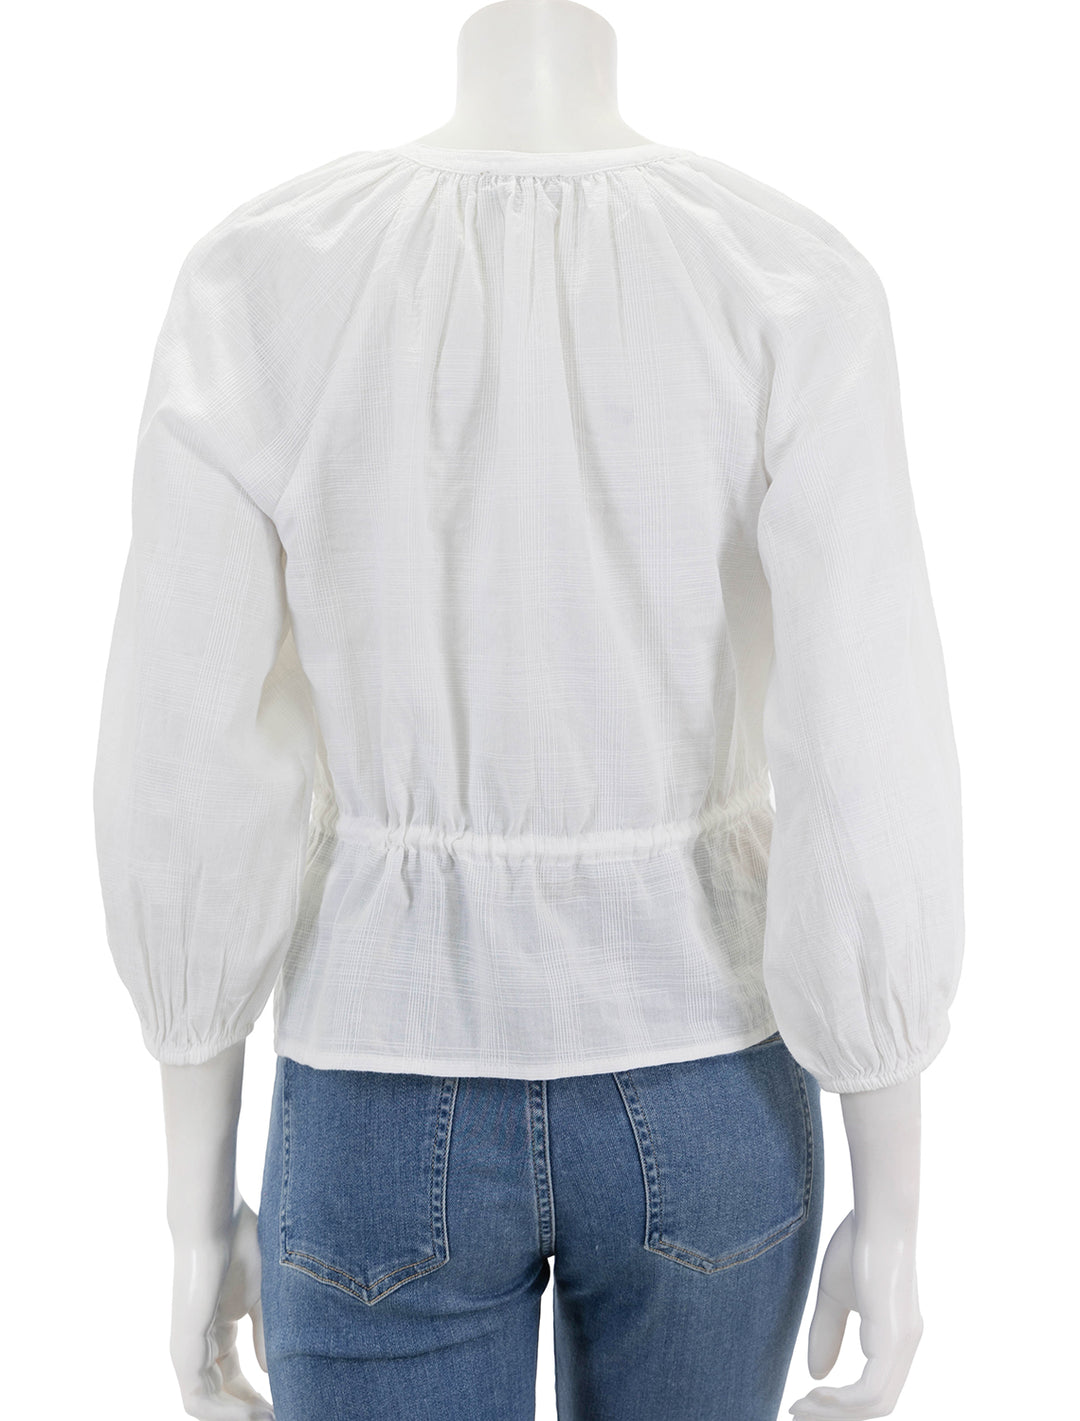 back view of tie waist top in white